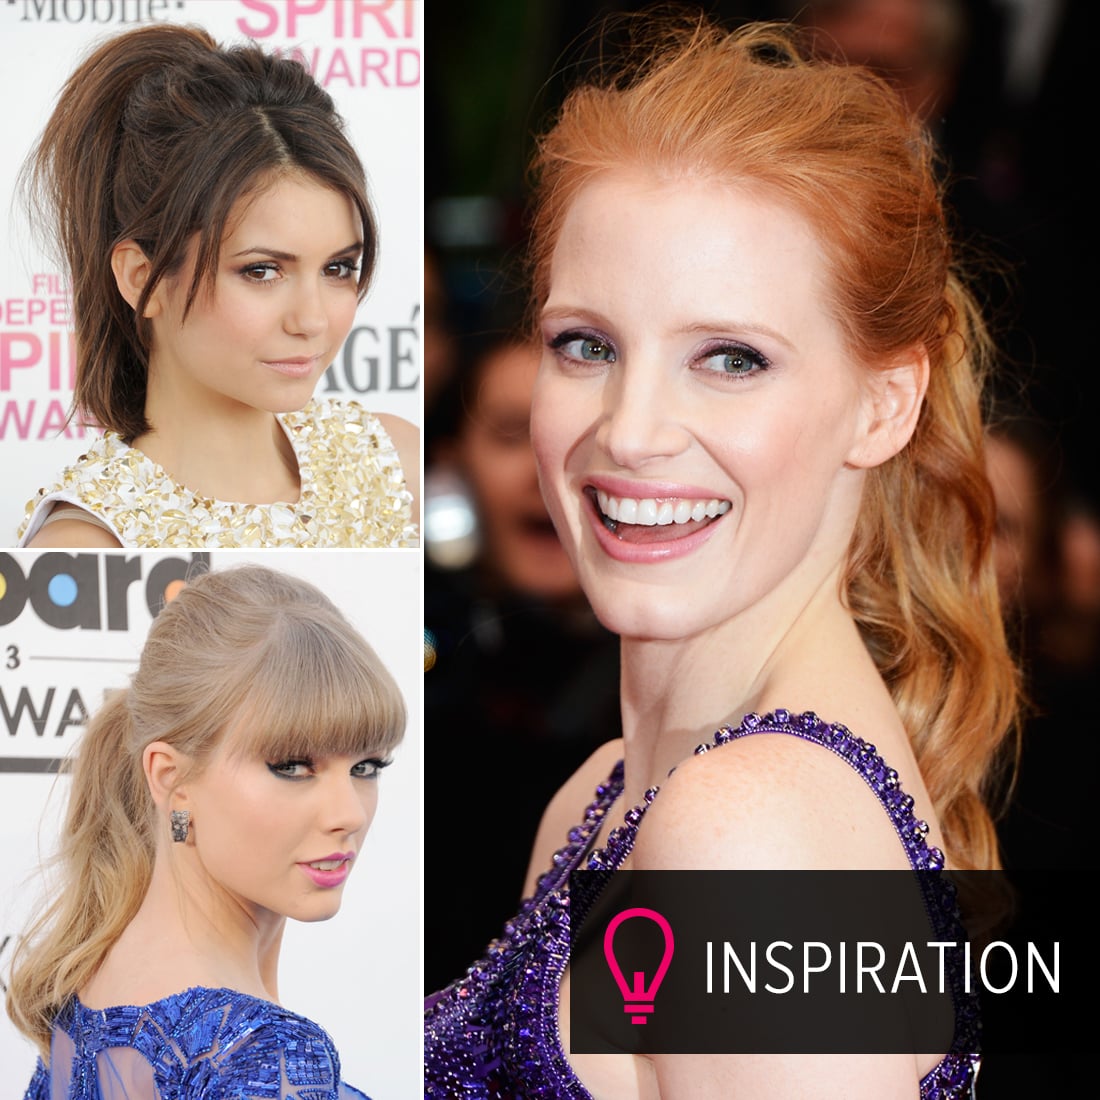 10 Haircuts that Make Petite Women Stand Out From a Crowd - Olivia Emma